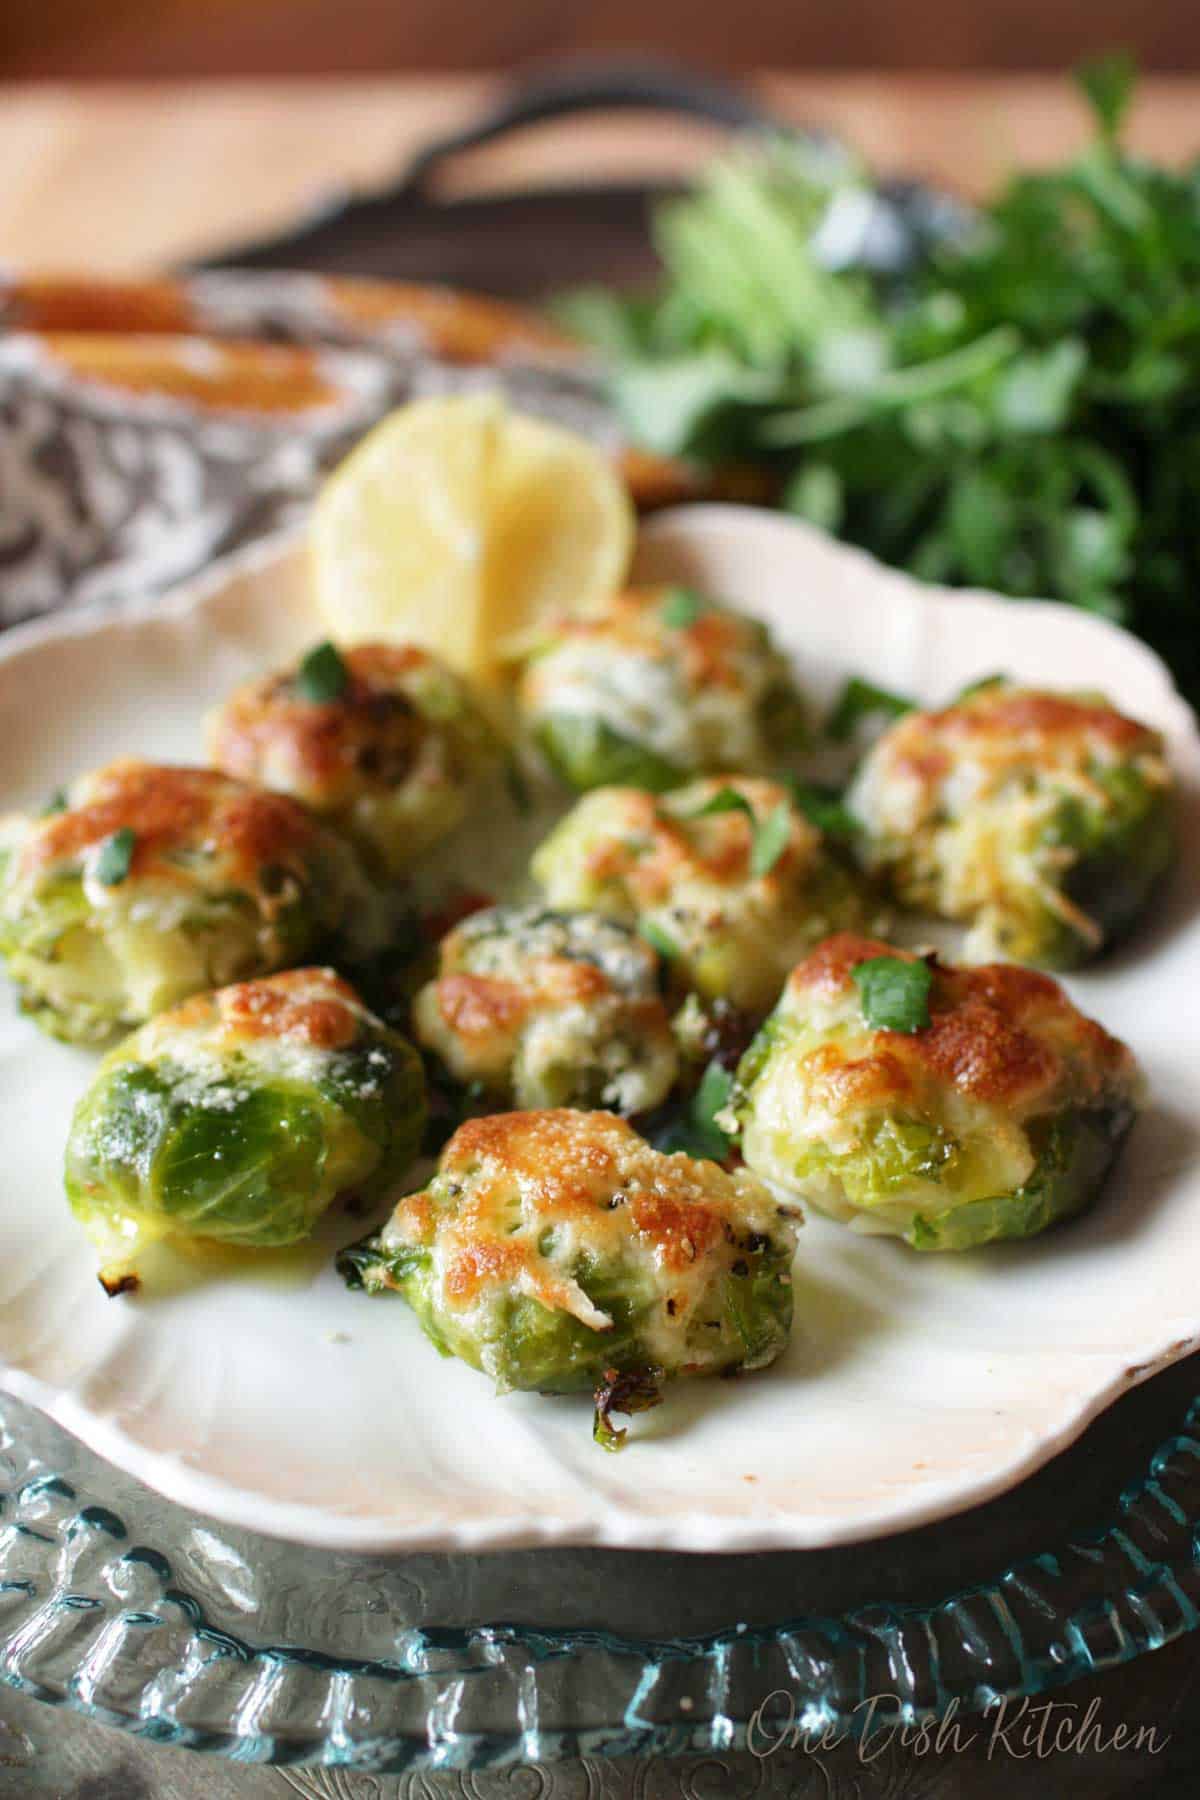 A plate of cheesy smashed brussels sprouts garnished with lemon slices.